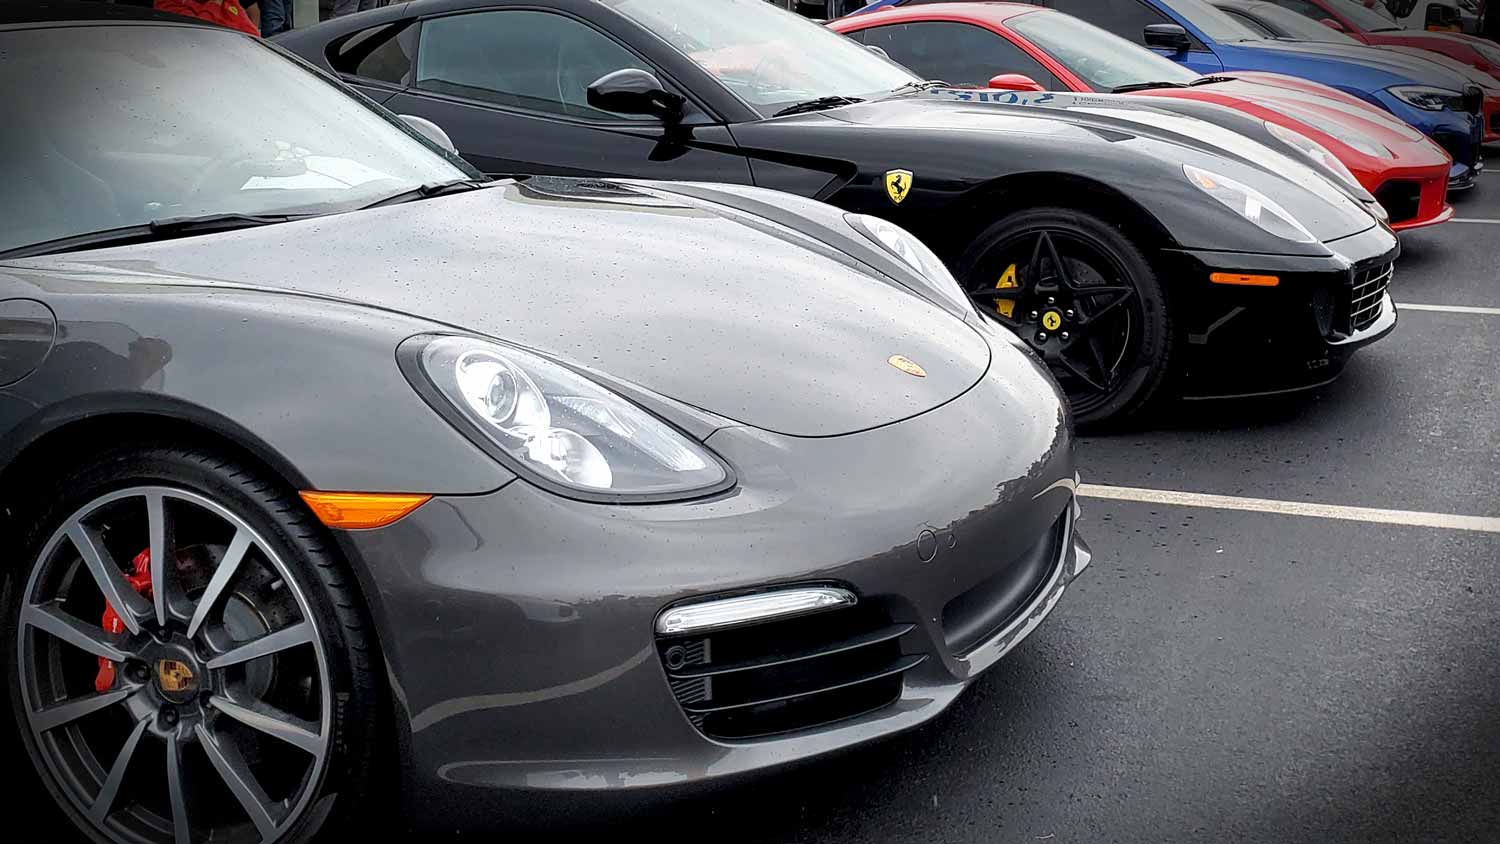 Porsches and Ferraris at Motor Werks Cars & Coffee 2021.